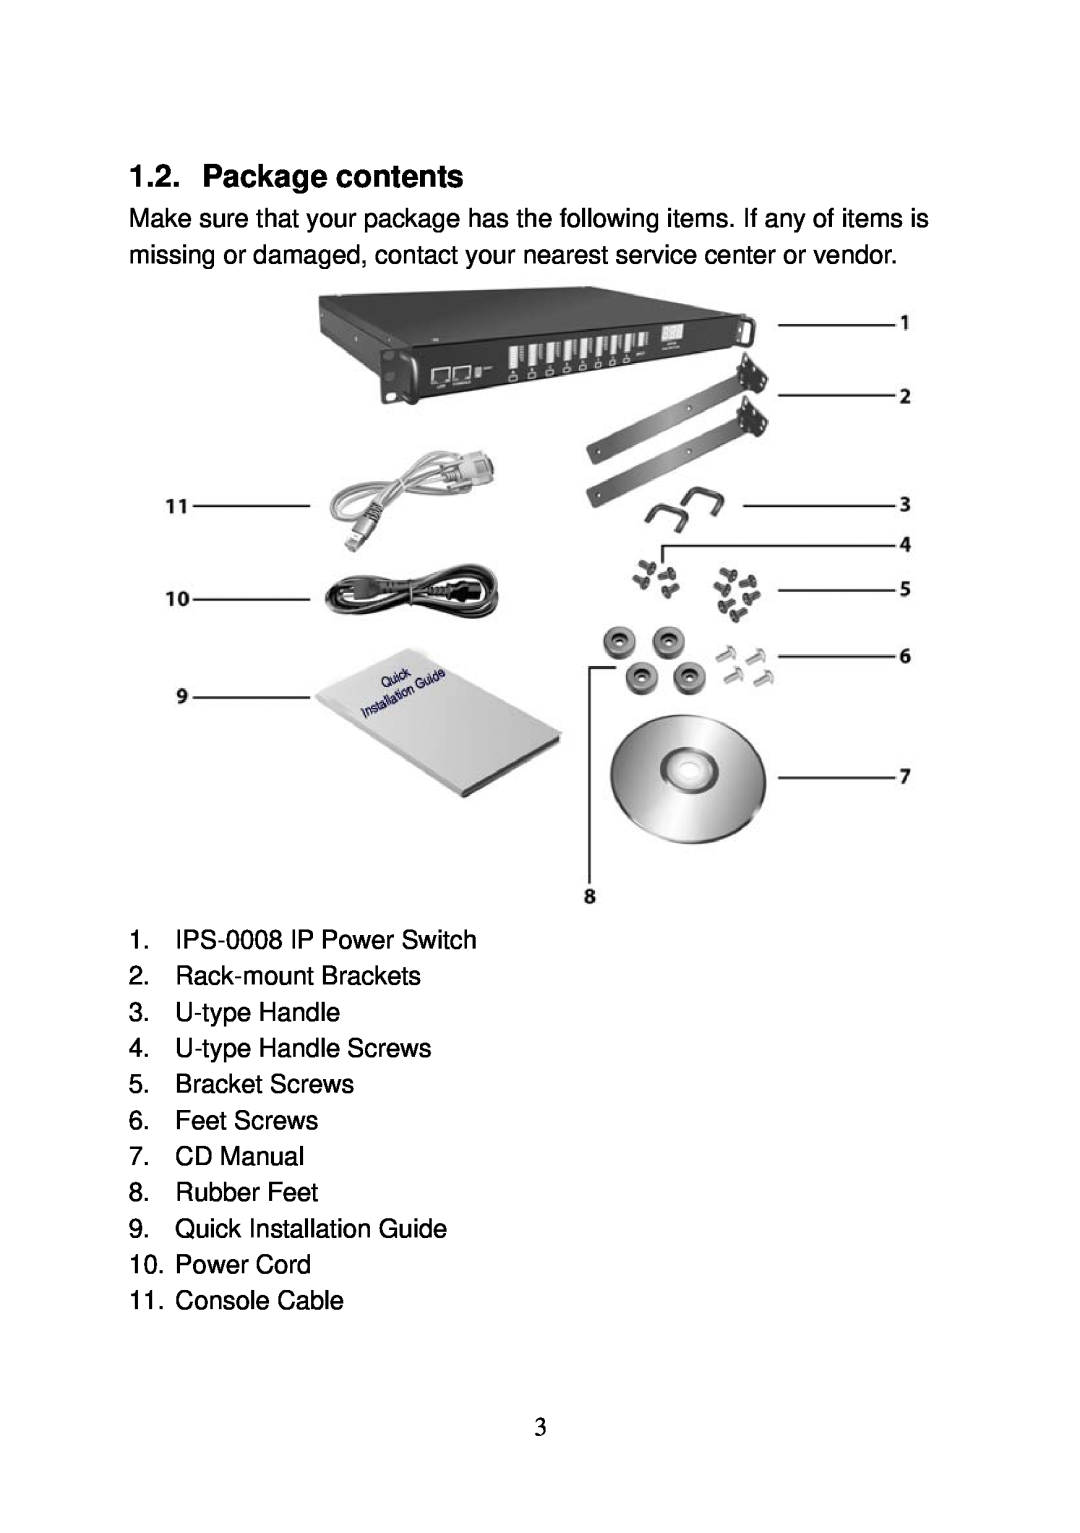 LevelOne user manual Package contents, IPS-0008 IP Power Switch 2. Rack-mount Brackets 3. U-type Handle, Console Cable 